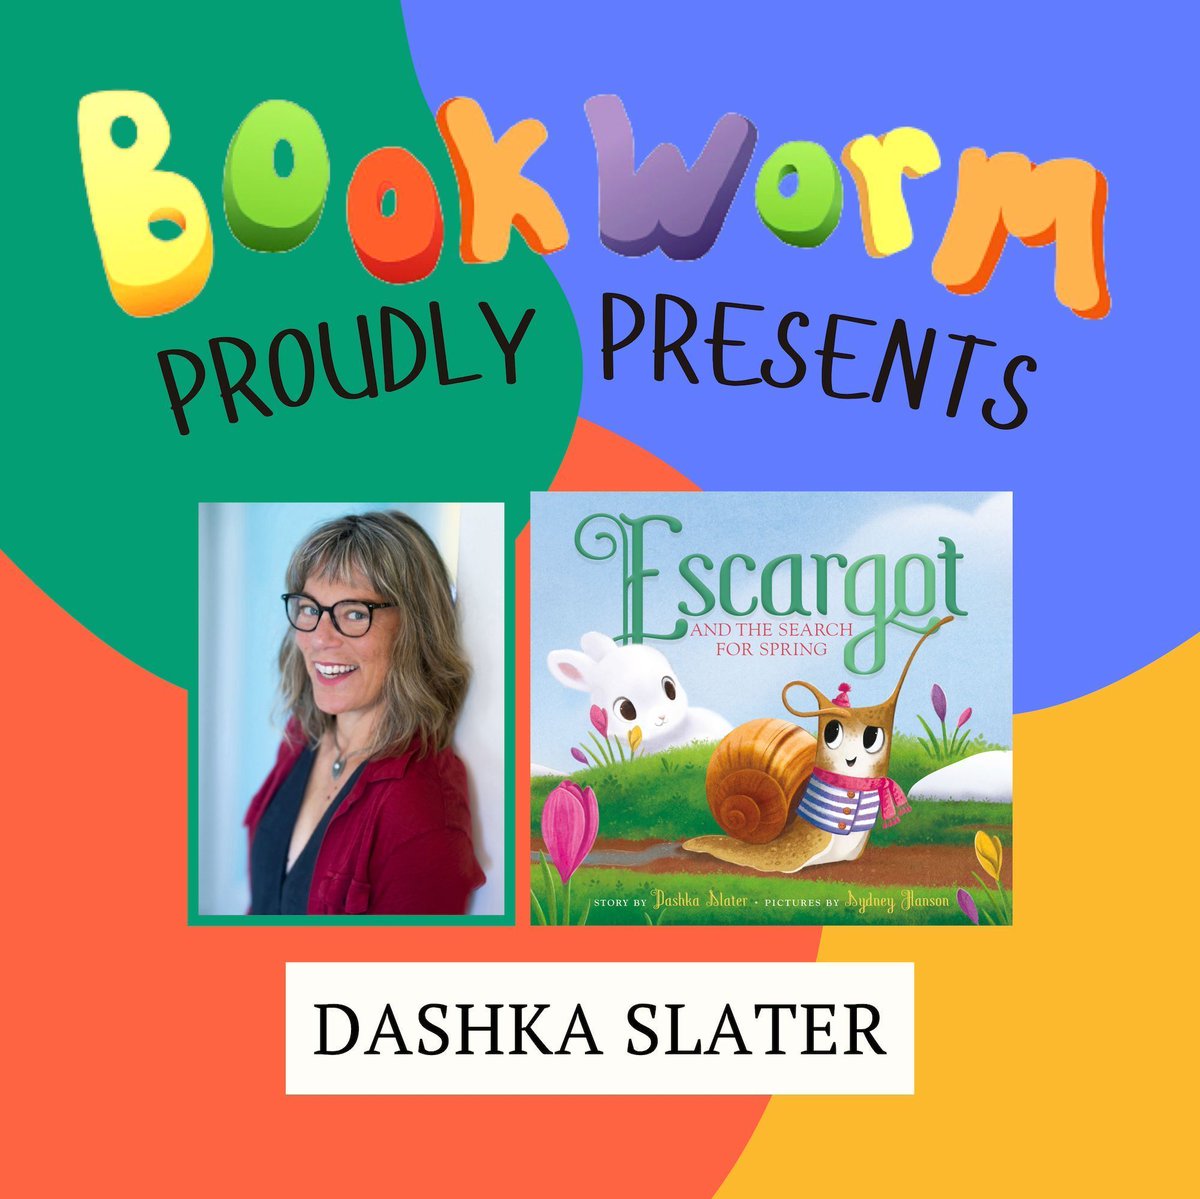 It's time to announce the second author coming to #BookwormHouston in 2024! Dashka Slater is coming with her book, Escargot and the Search for Spring! I wonder who's coming next... @DashkaSlater @MacKidsBooks